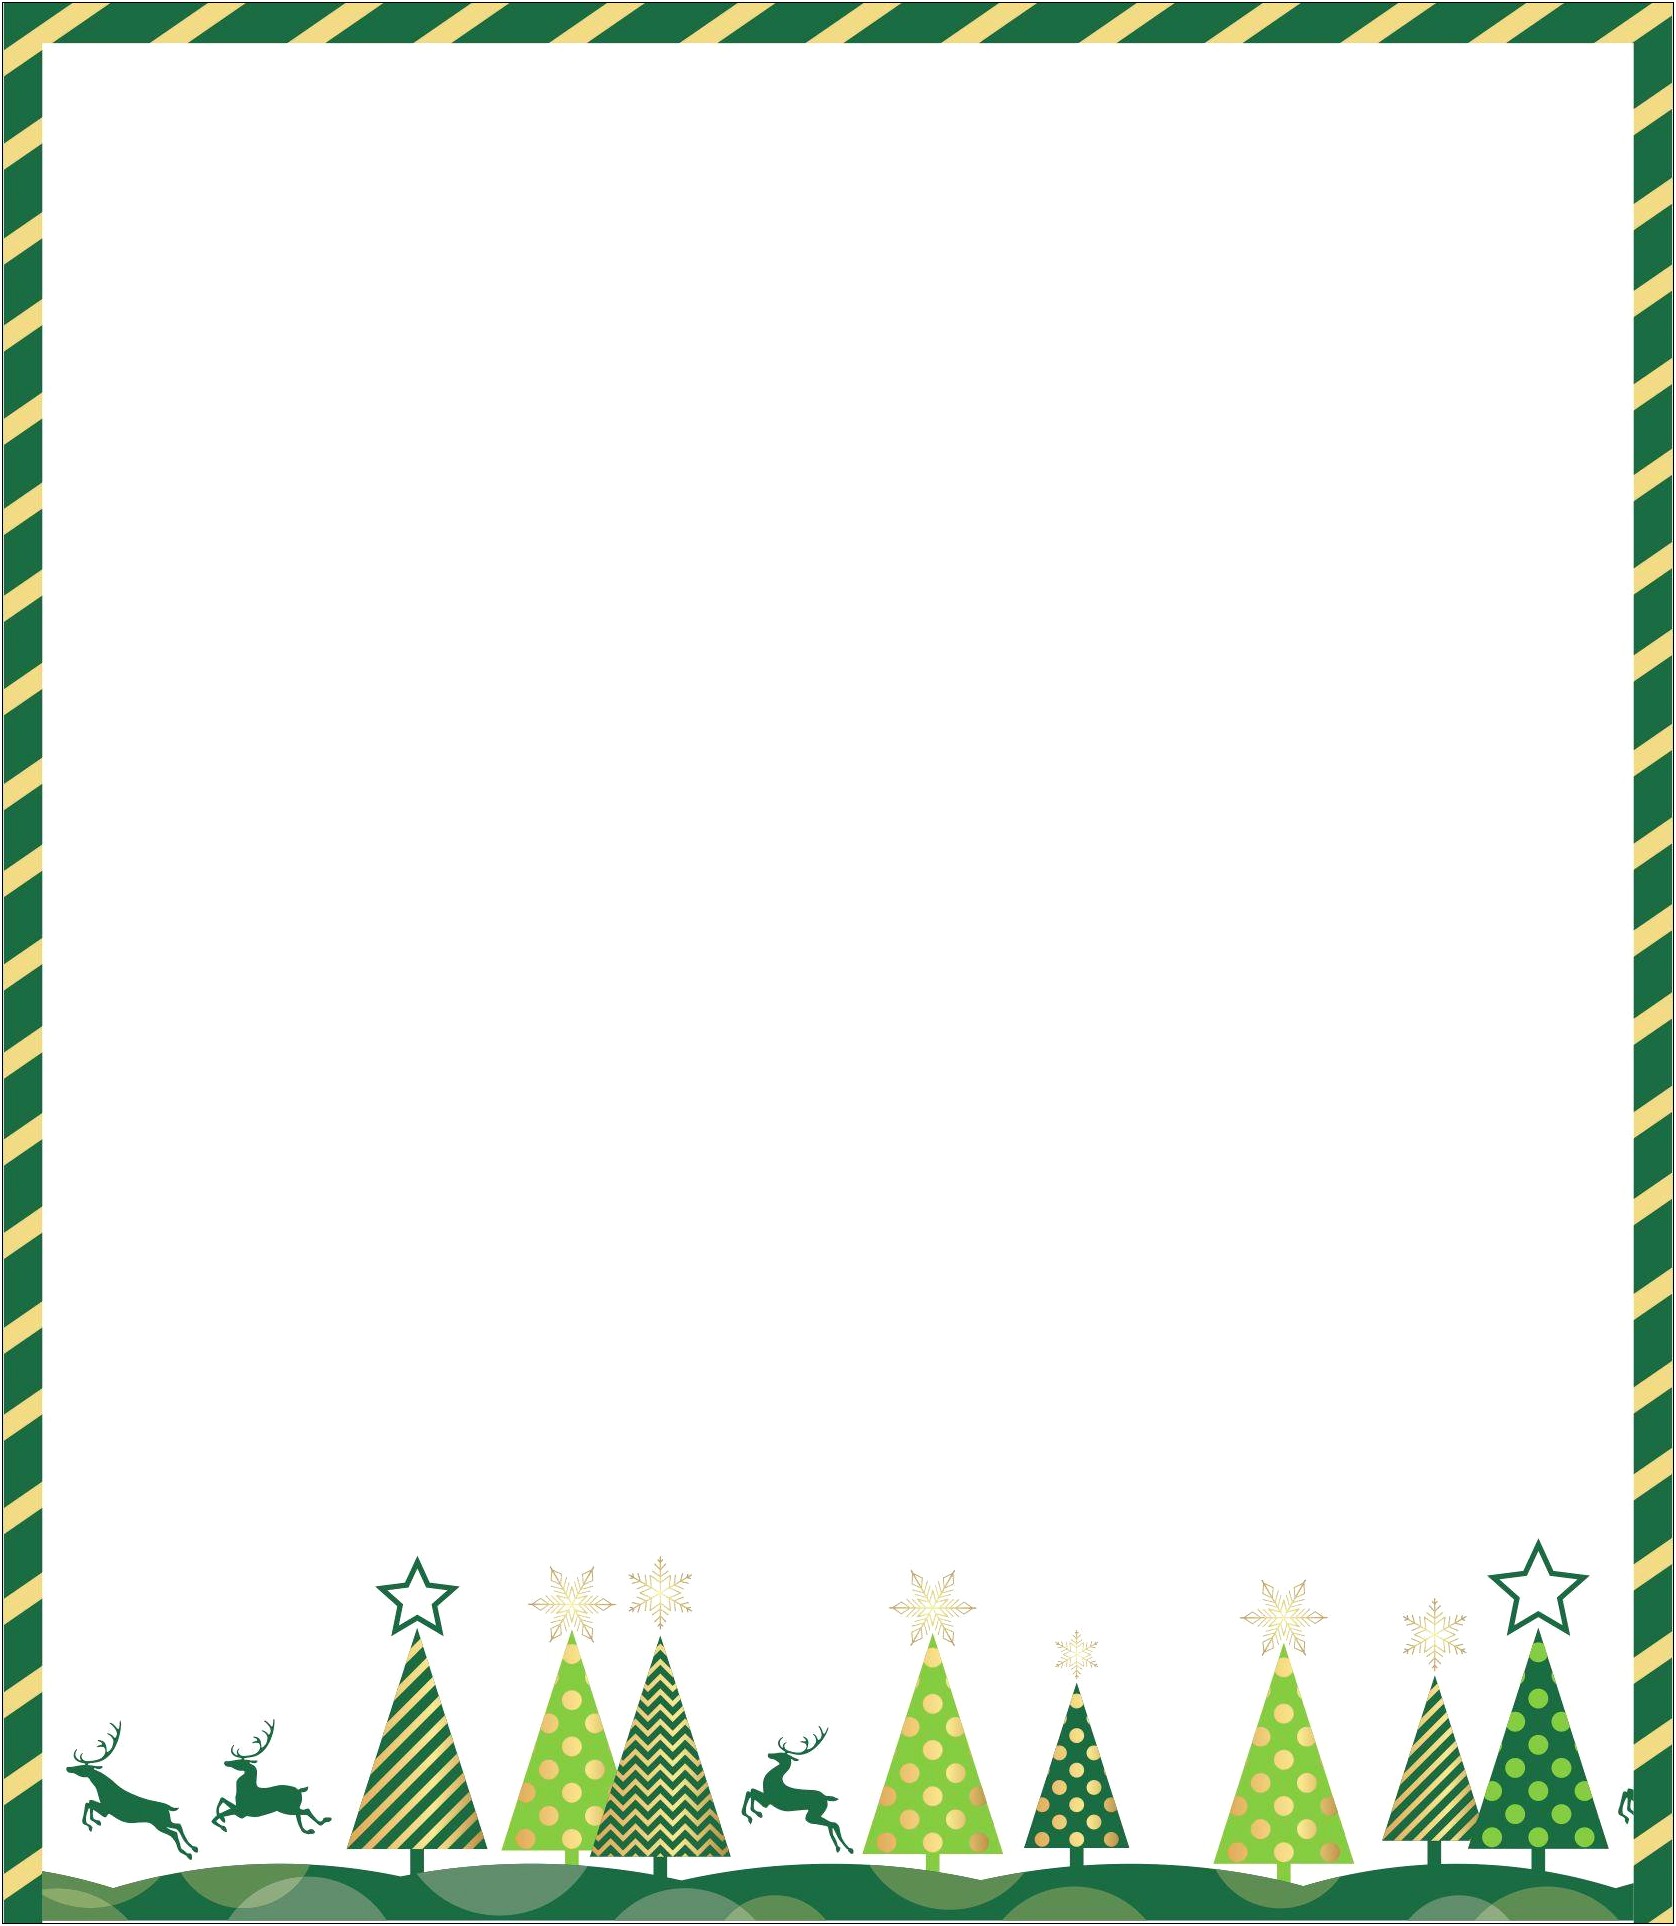 Free Christmas Border Templates For Publisher